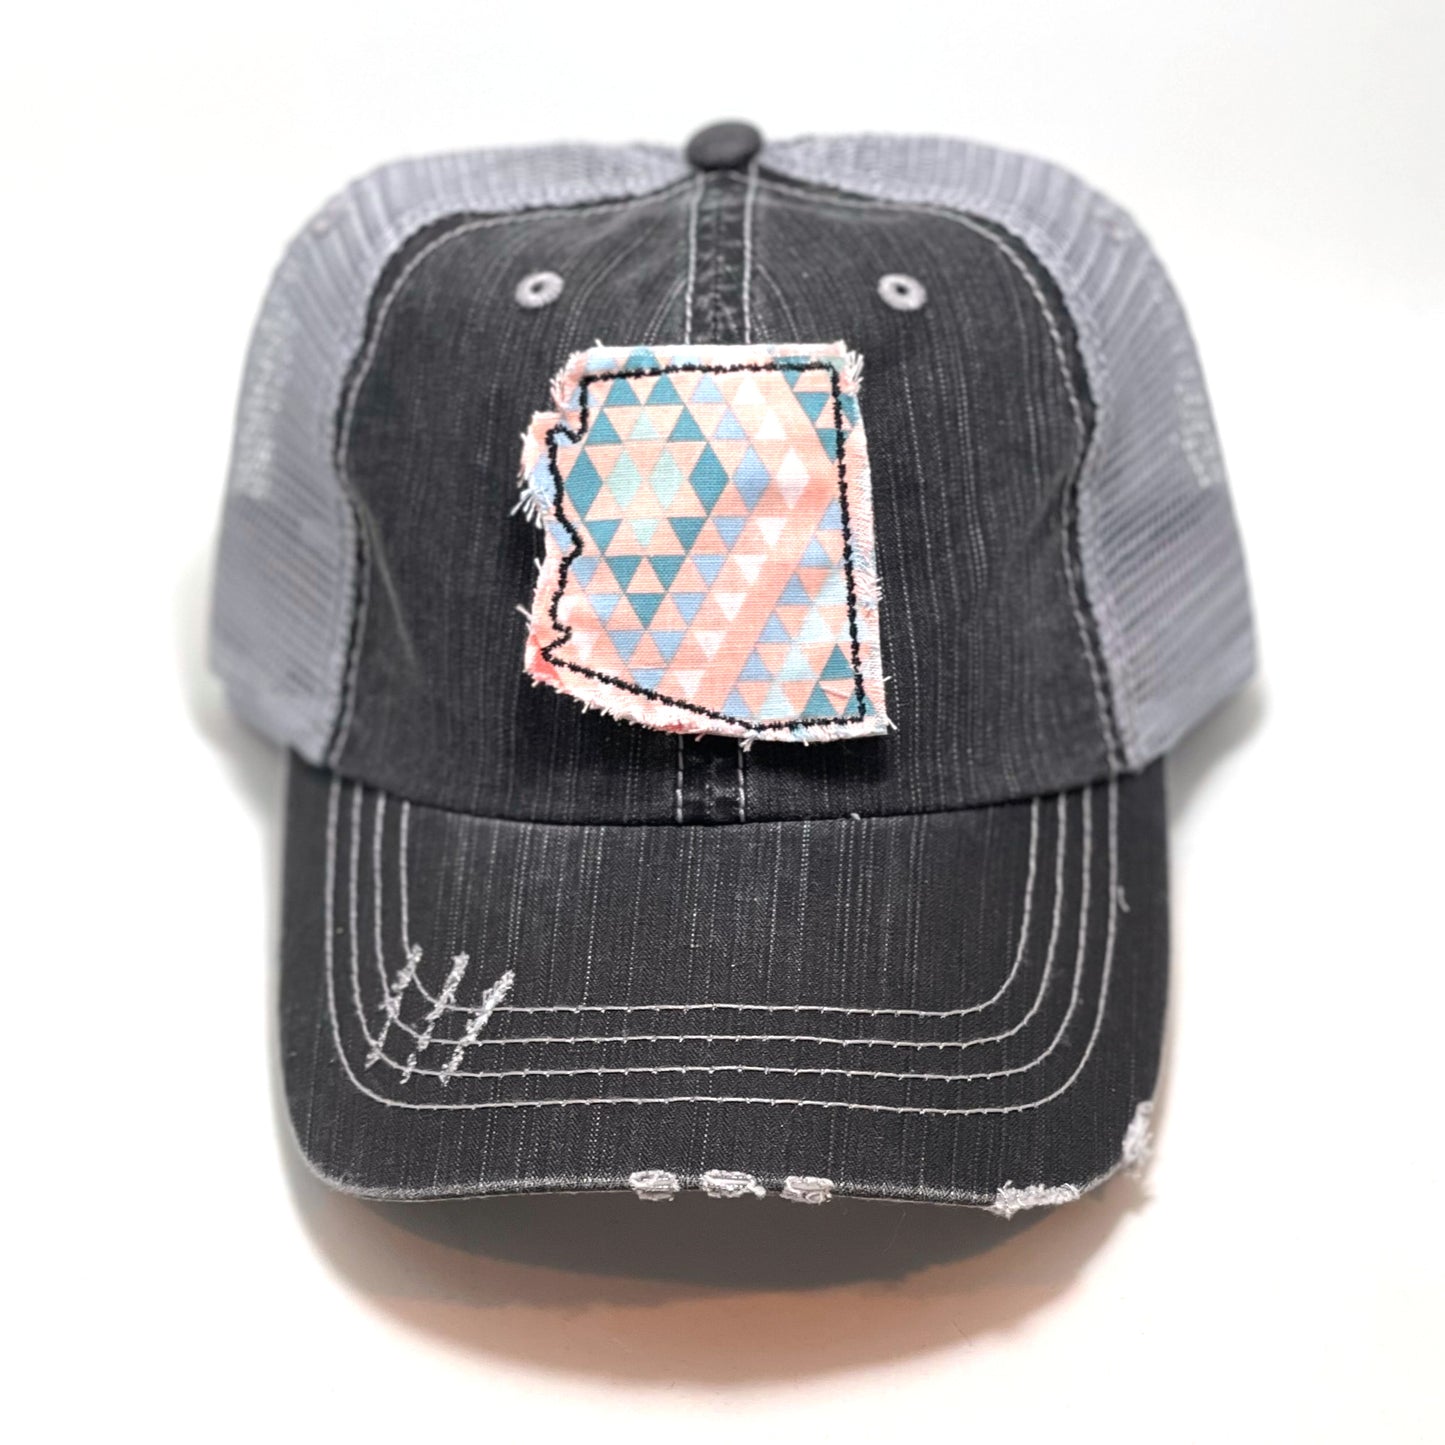 gray distressed trucker hat with gray floral fabric state of Arizona